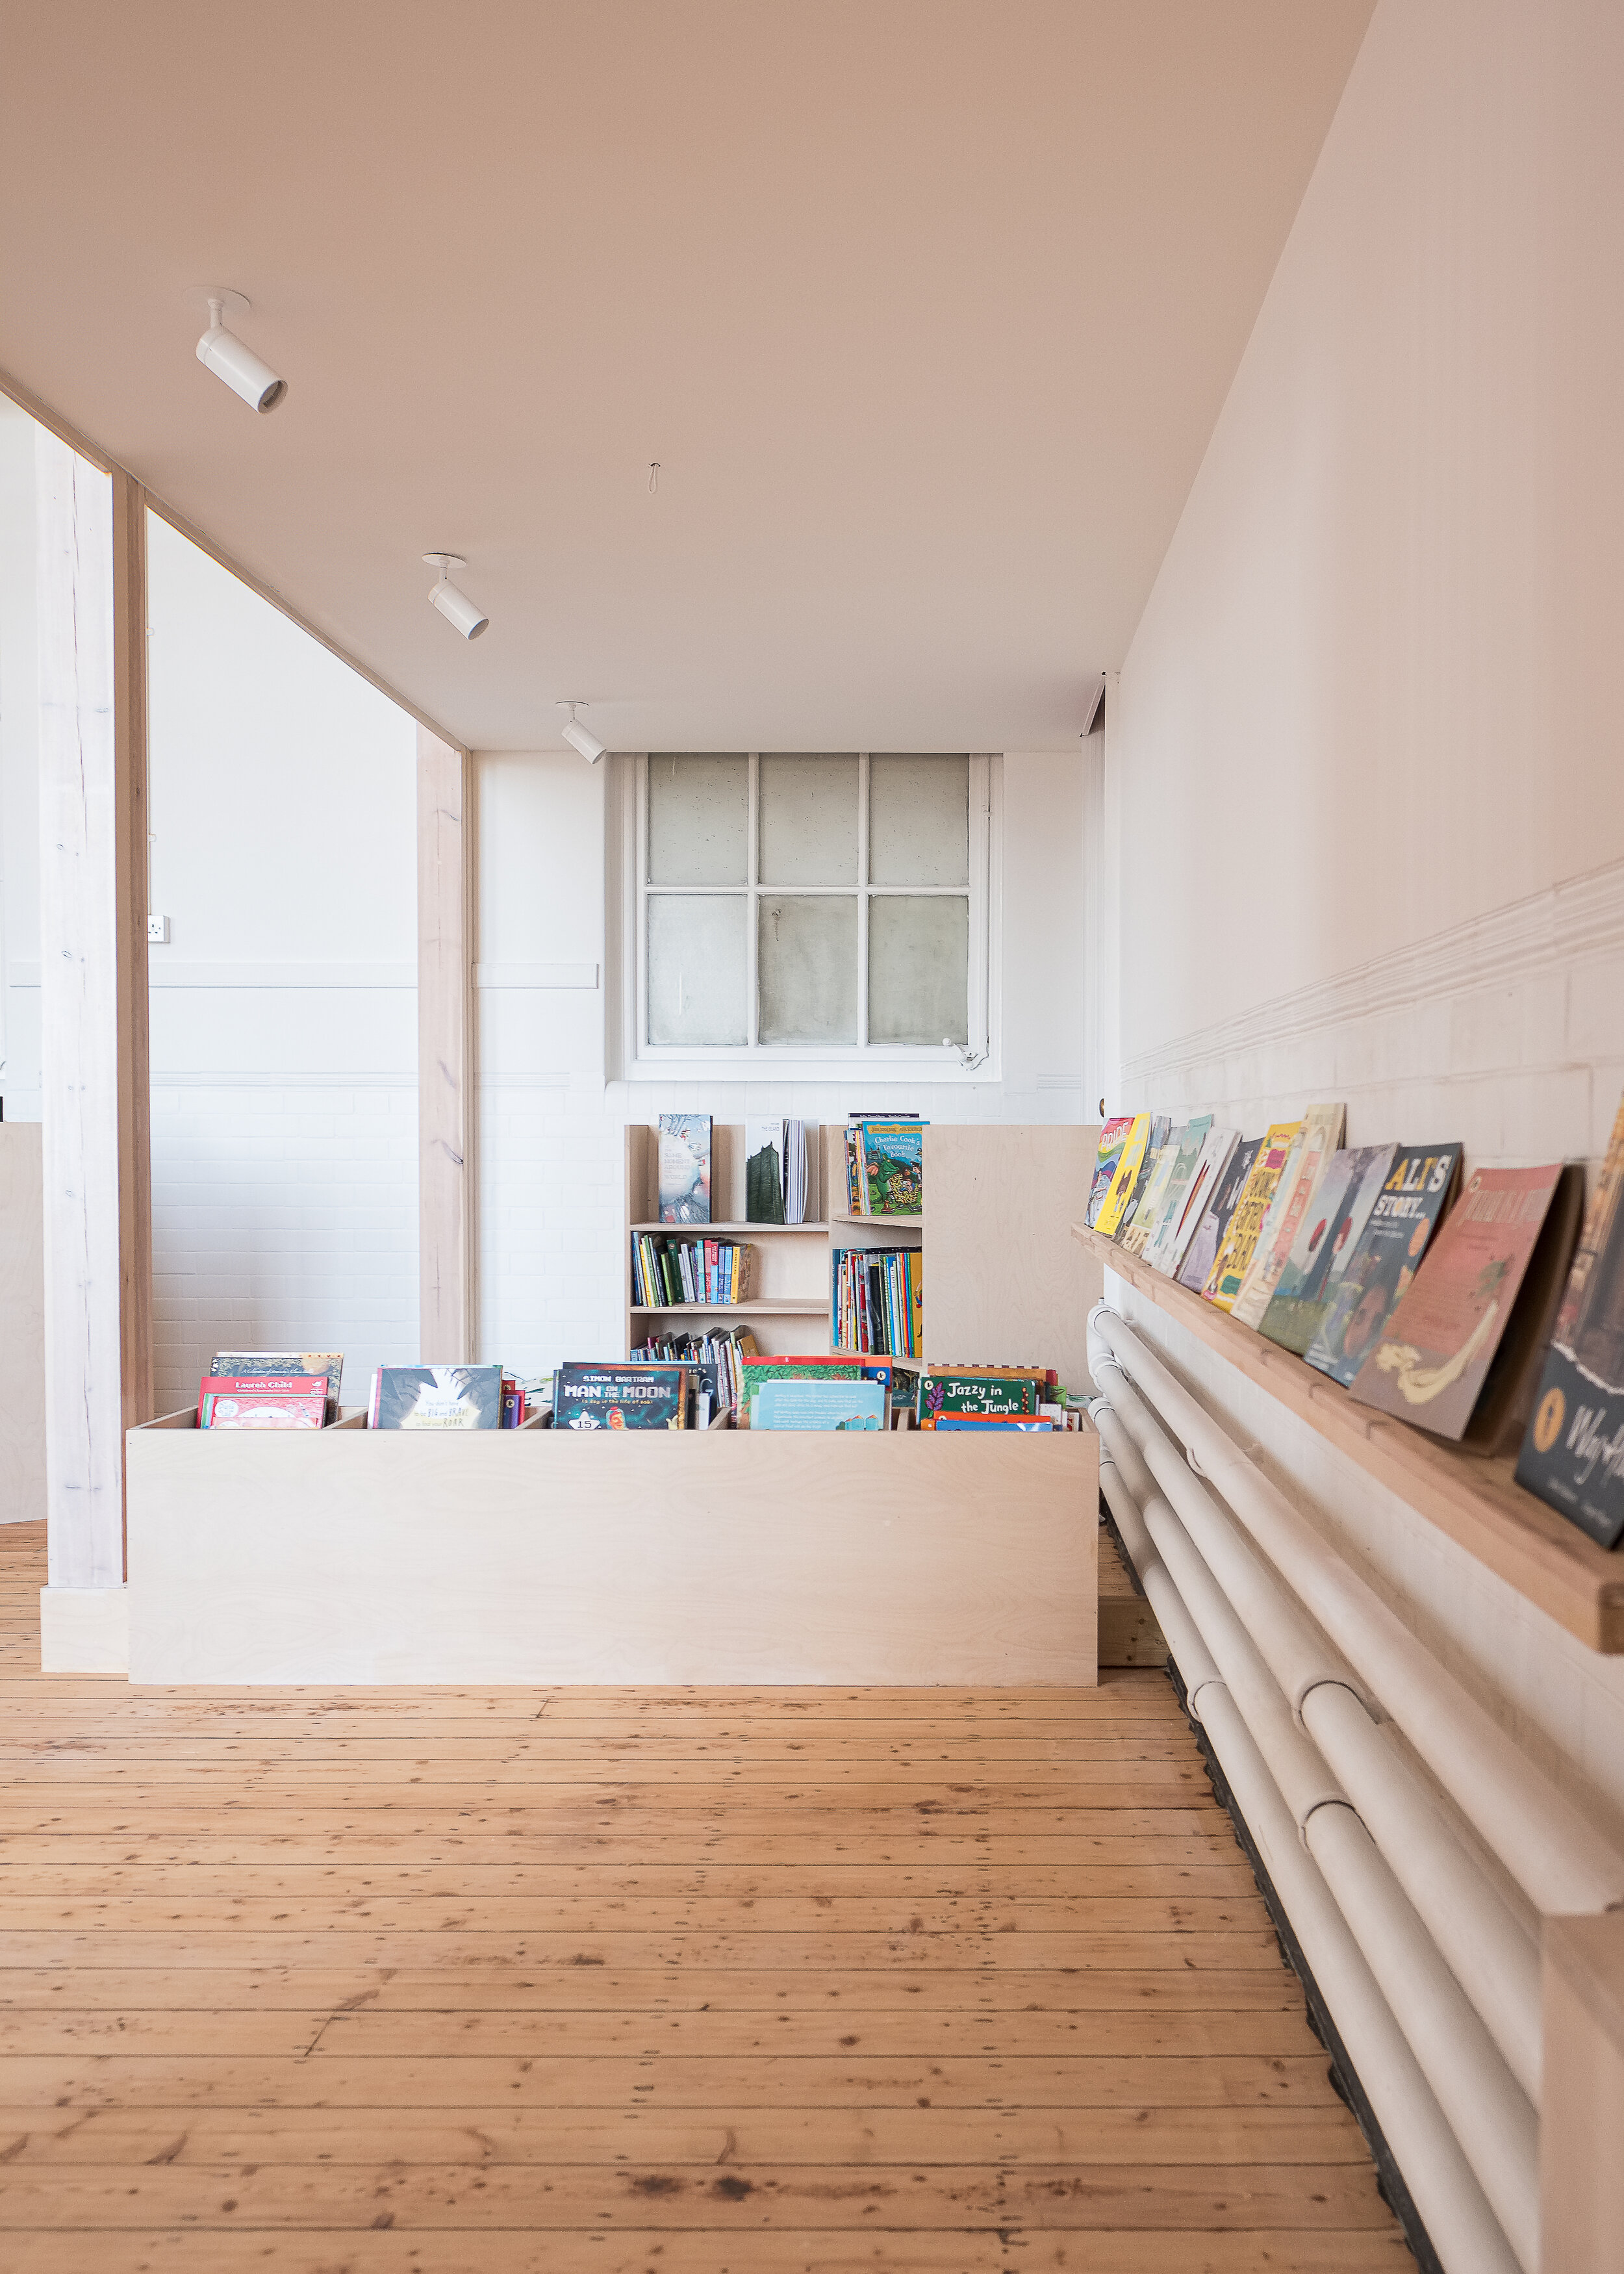 Fred+Howarth+Photography_Ivydale+Library_15.jpg